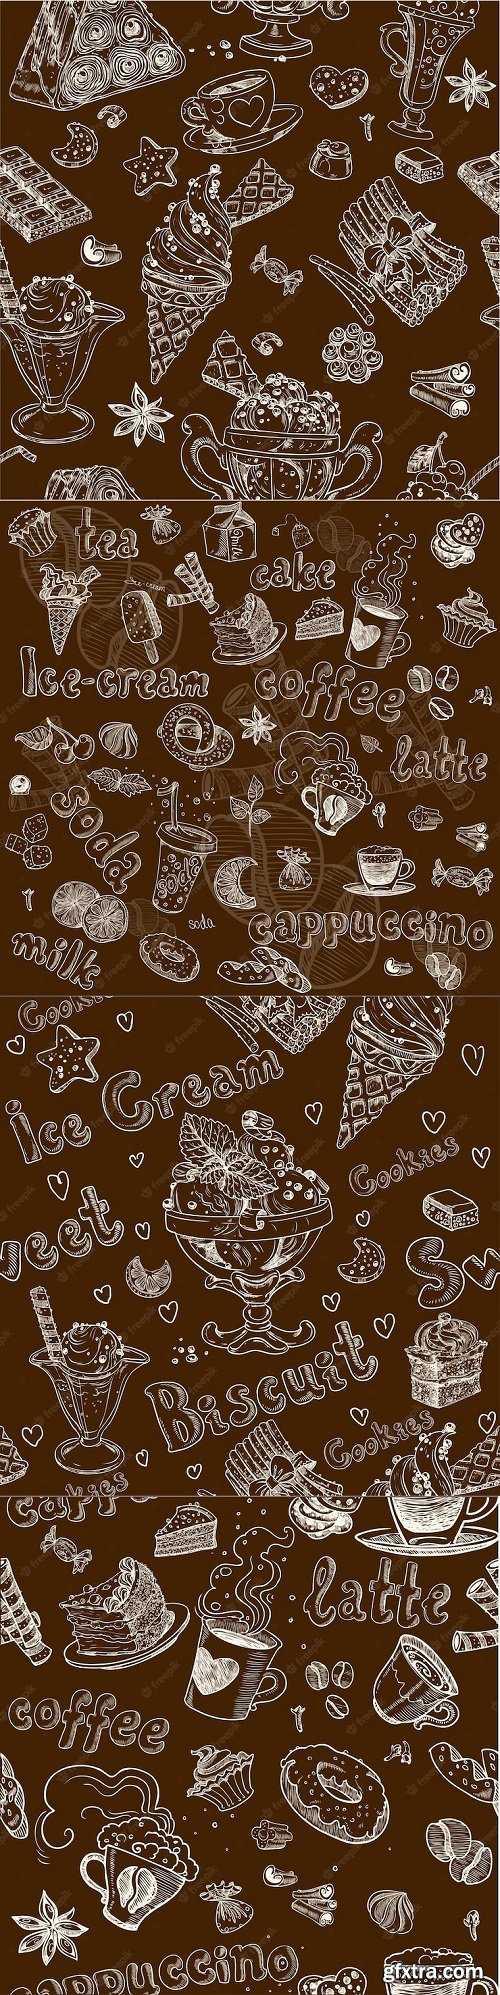 Seamless pattern with coffee cakes pies latte and ice cream